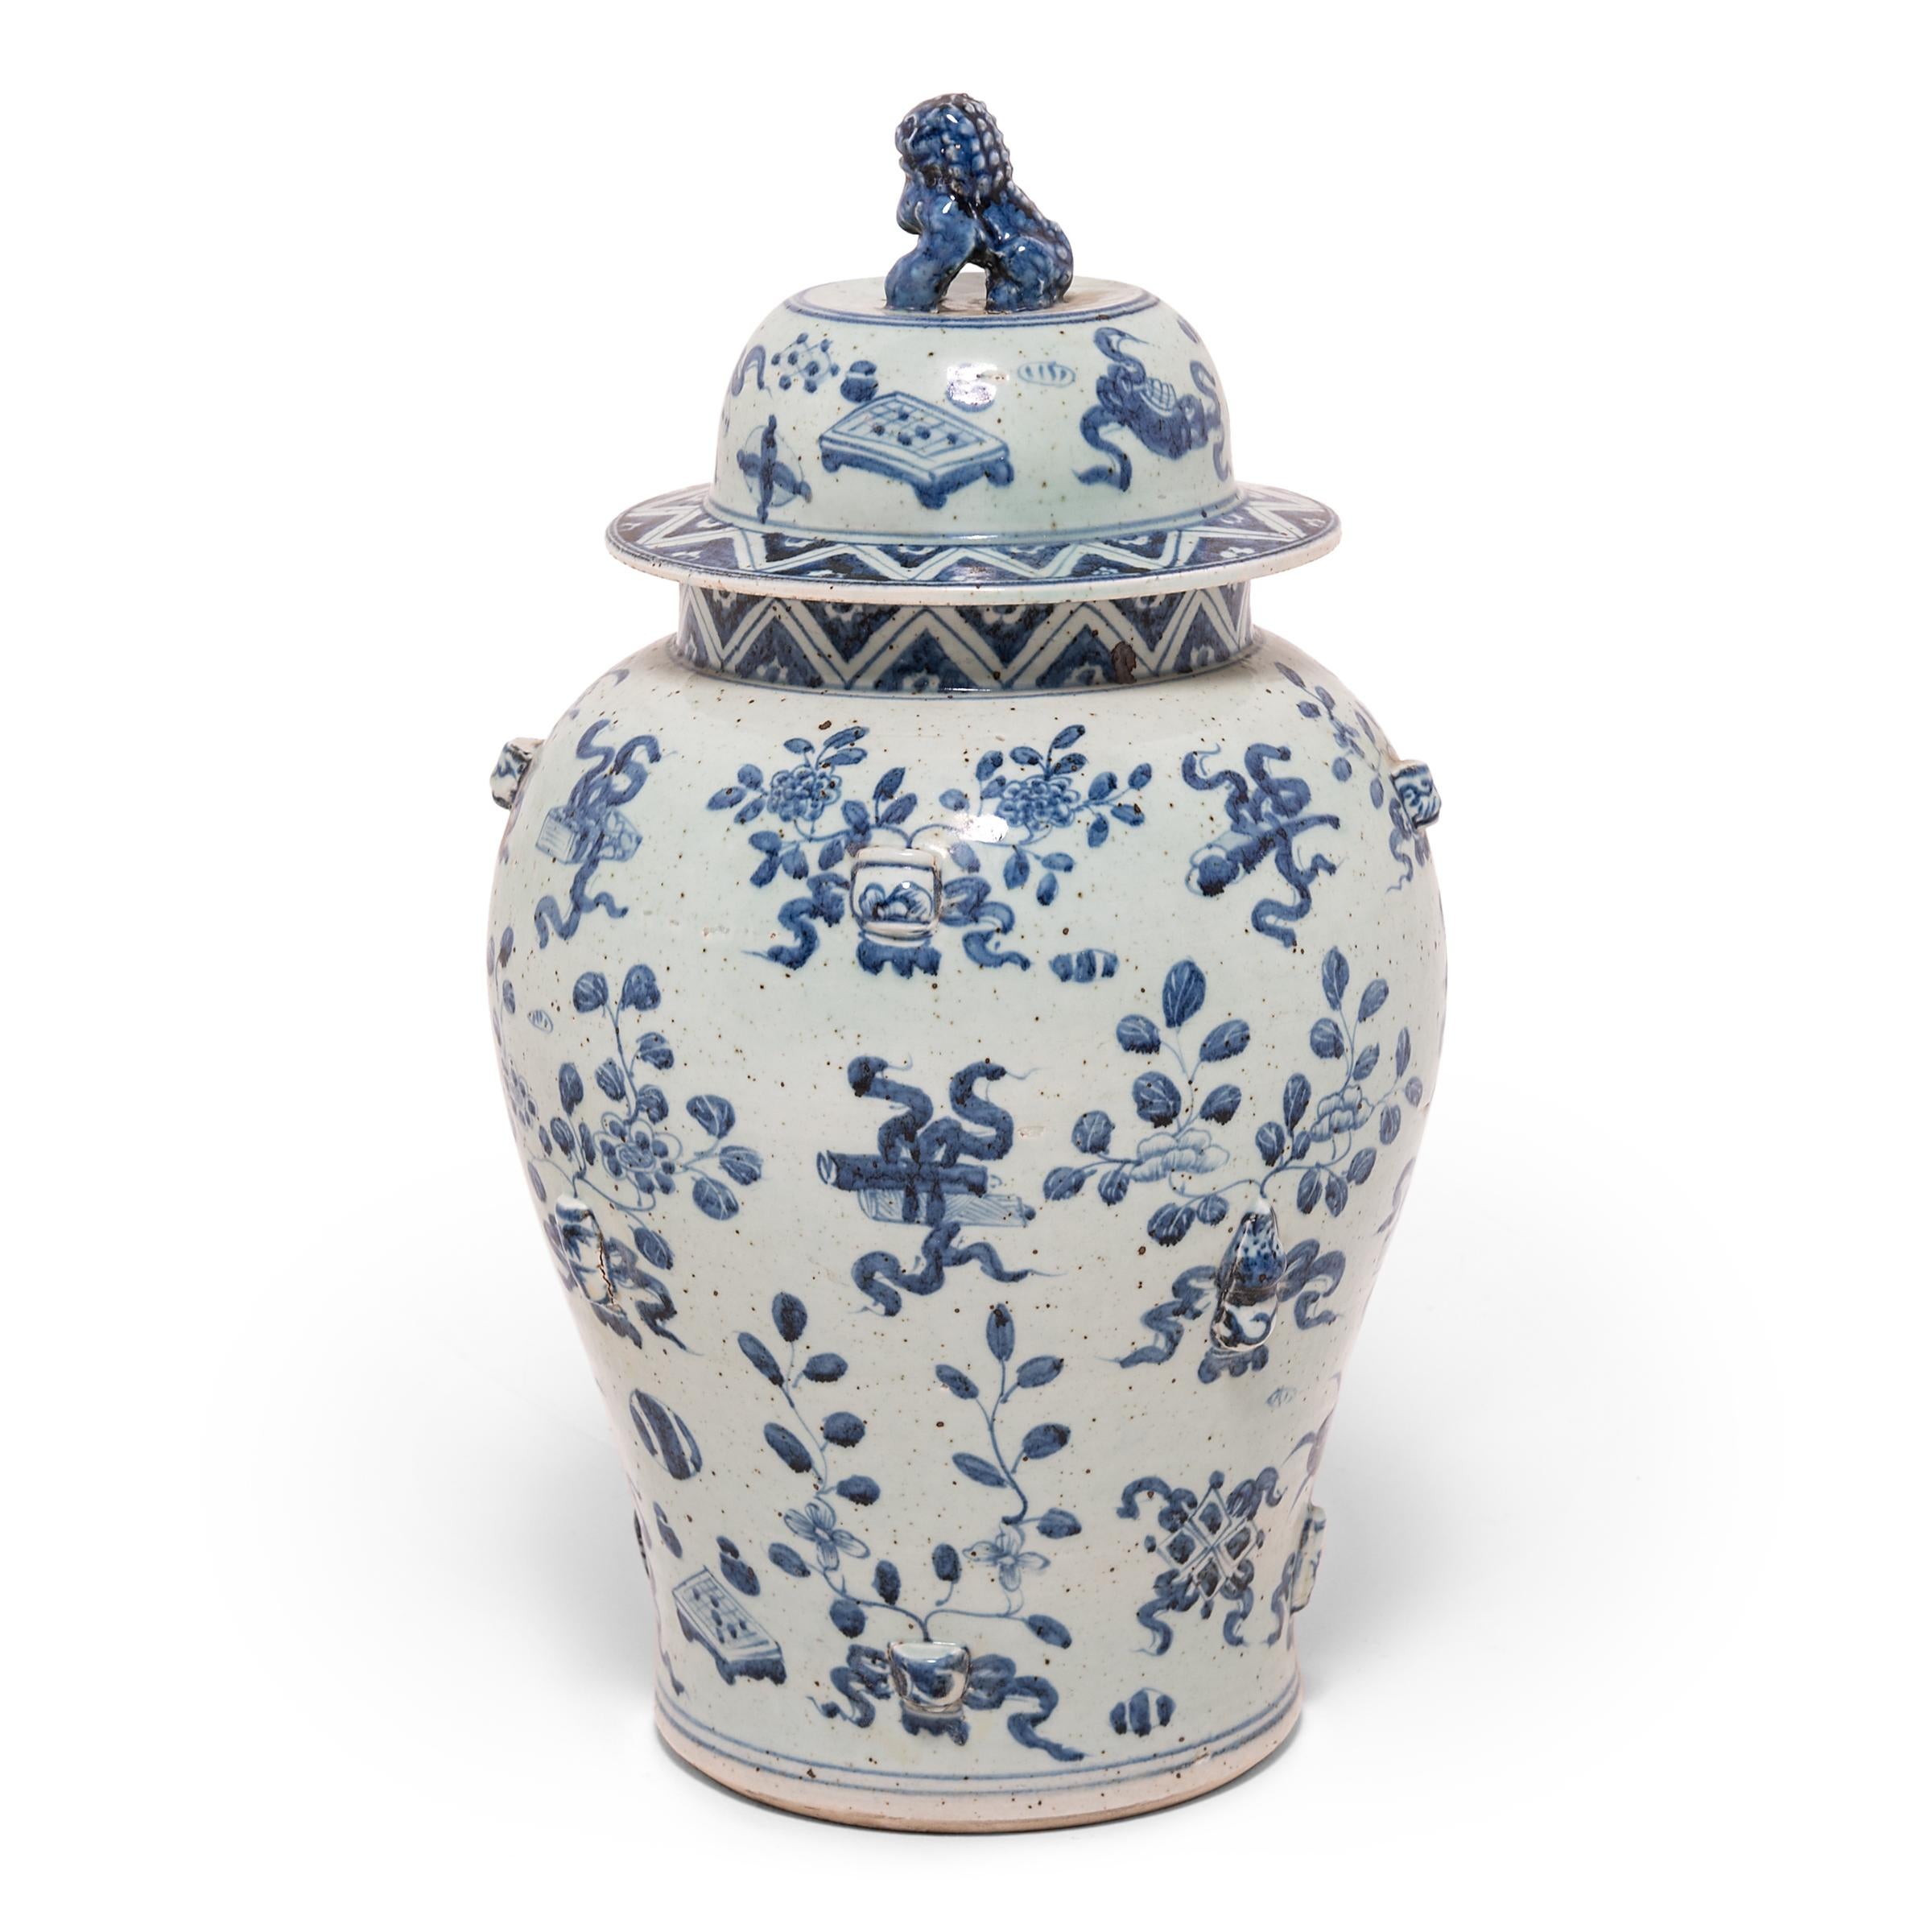 This contemporary ginger jar continues the tradition of Chinese blue-and-white ceramics with Classic curves and auspicious, hand-painted decorations. Symbols that would surely give a Chinese scholar joy - yin yang, double-luck coins, and painted